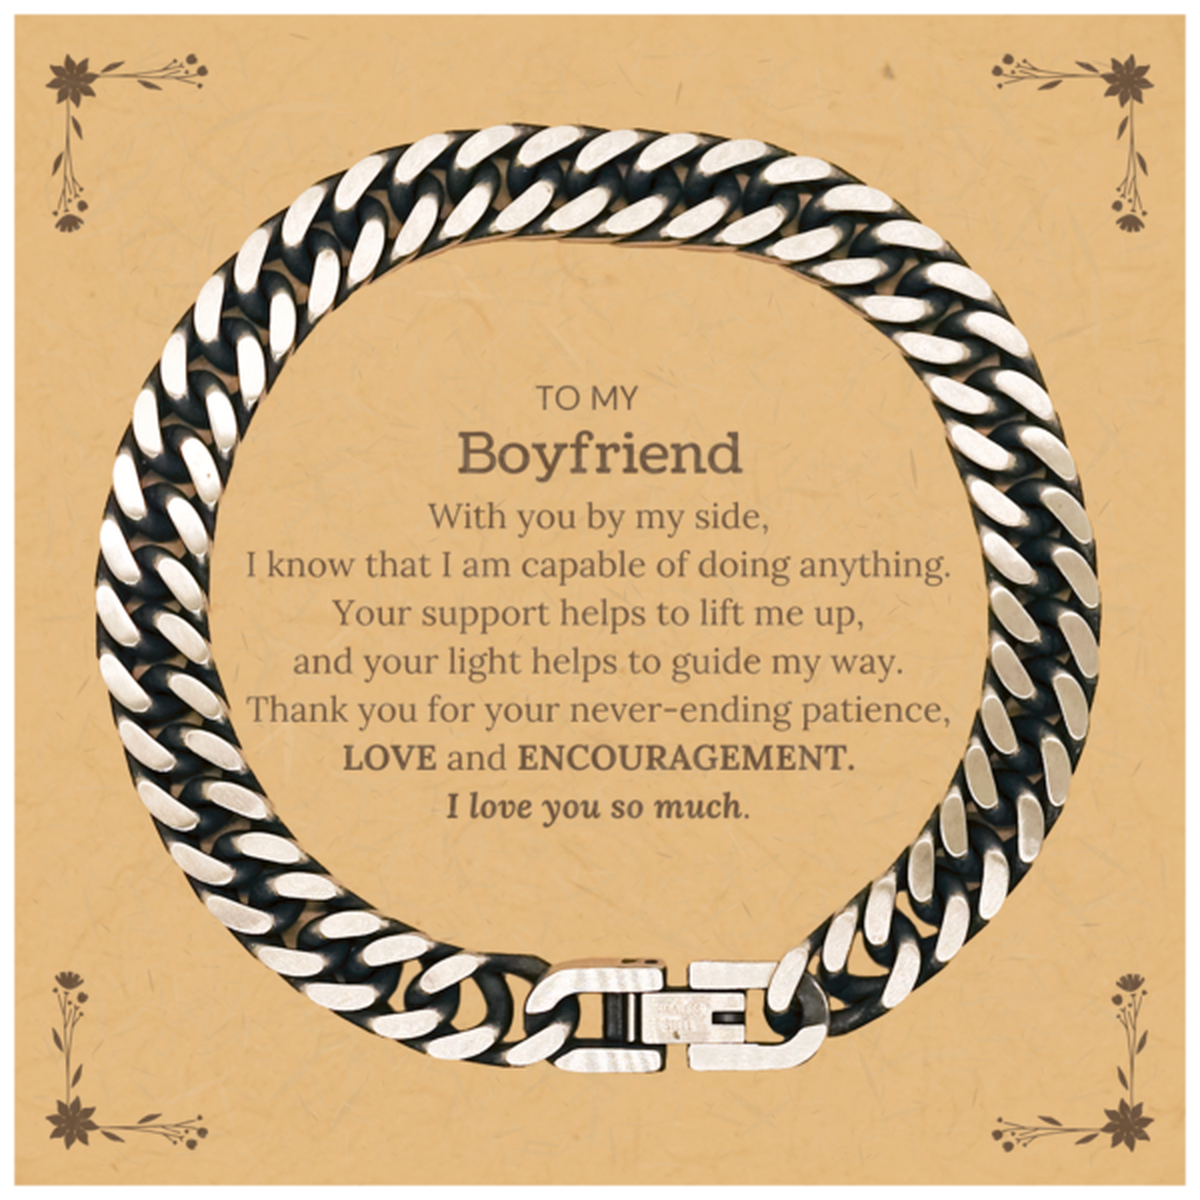 Appreciation Boyfriend Cuban Link Chain Bracelet Gifts, To My Boyfriend Birthday Christmas Wedding Keepsake Gifts for Boyfriend With you by my side, I know that I am capable of doing anything. I love you so much